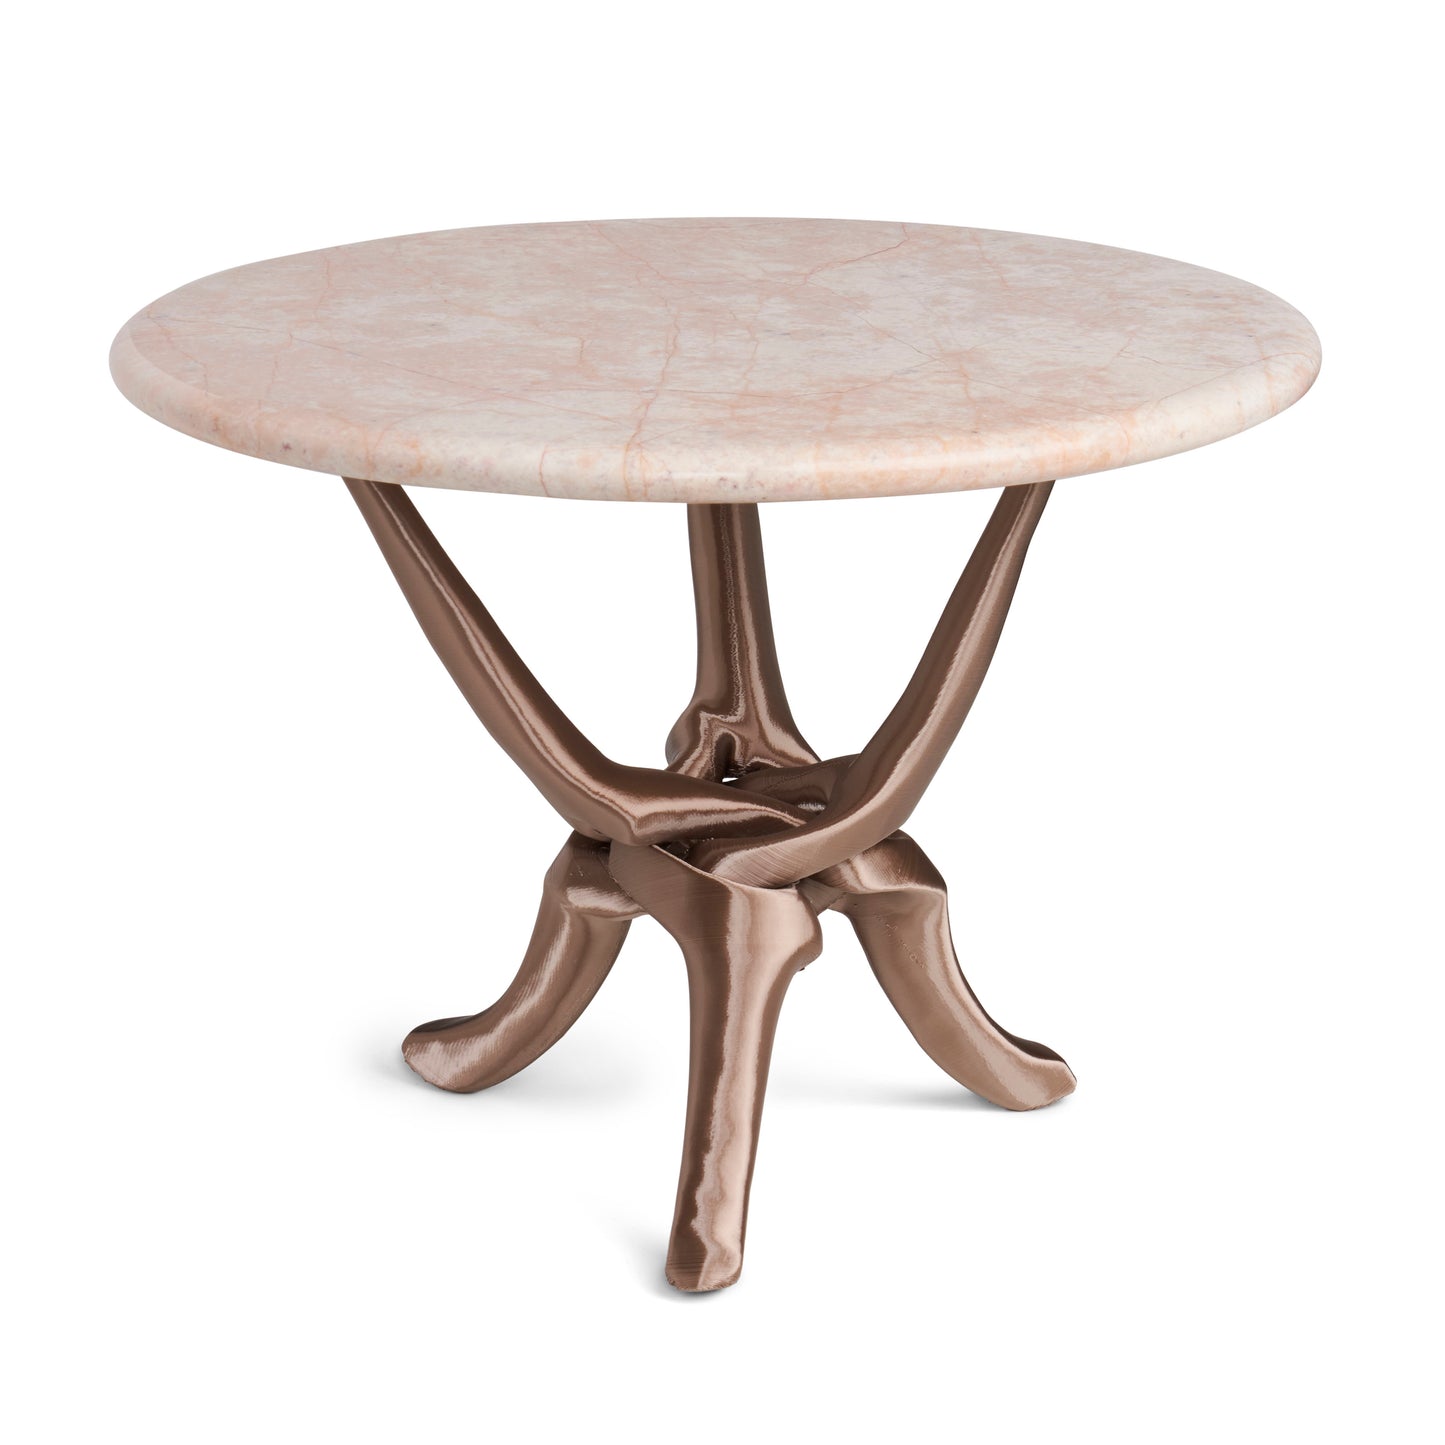 Campagne Gold Stand with Pink Natural Marble Top